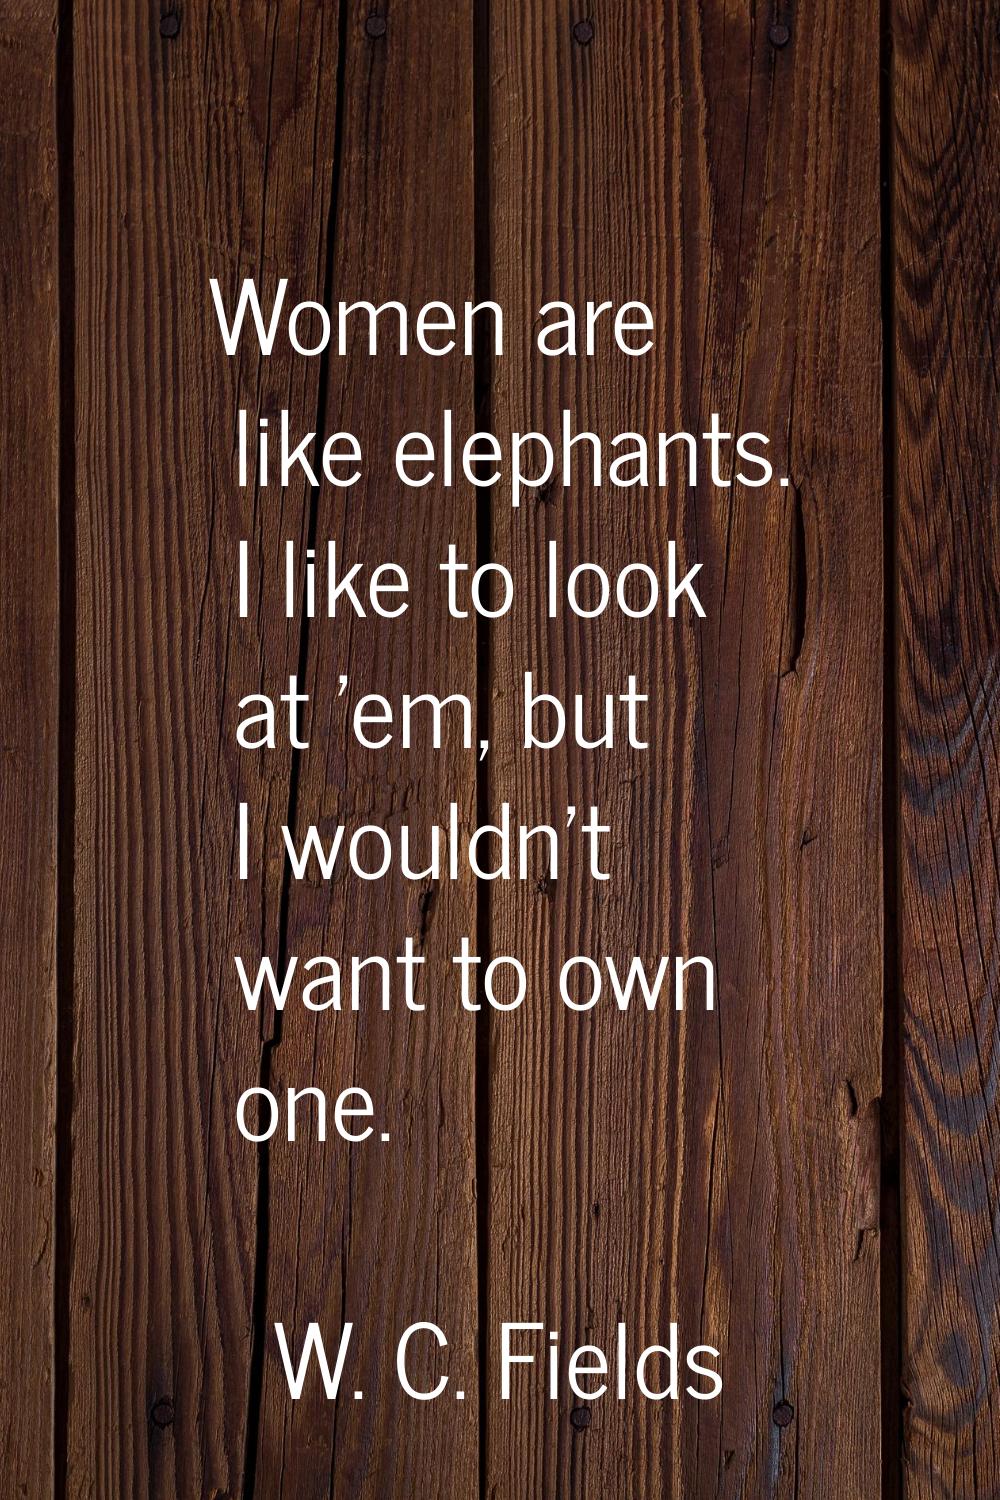 Women are like elephants. I like to look at 'em, but I wouldn't want to own one.